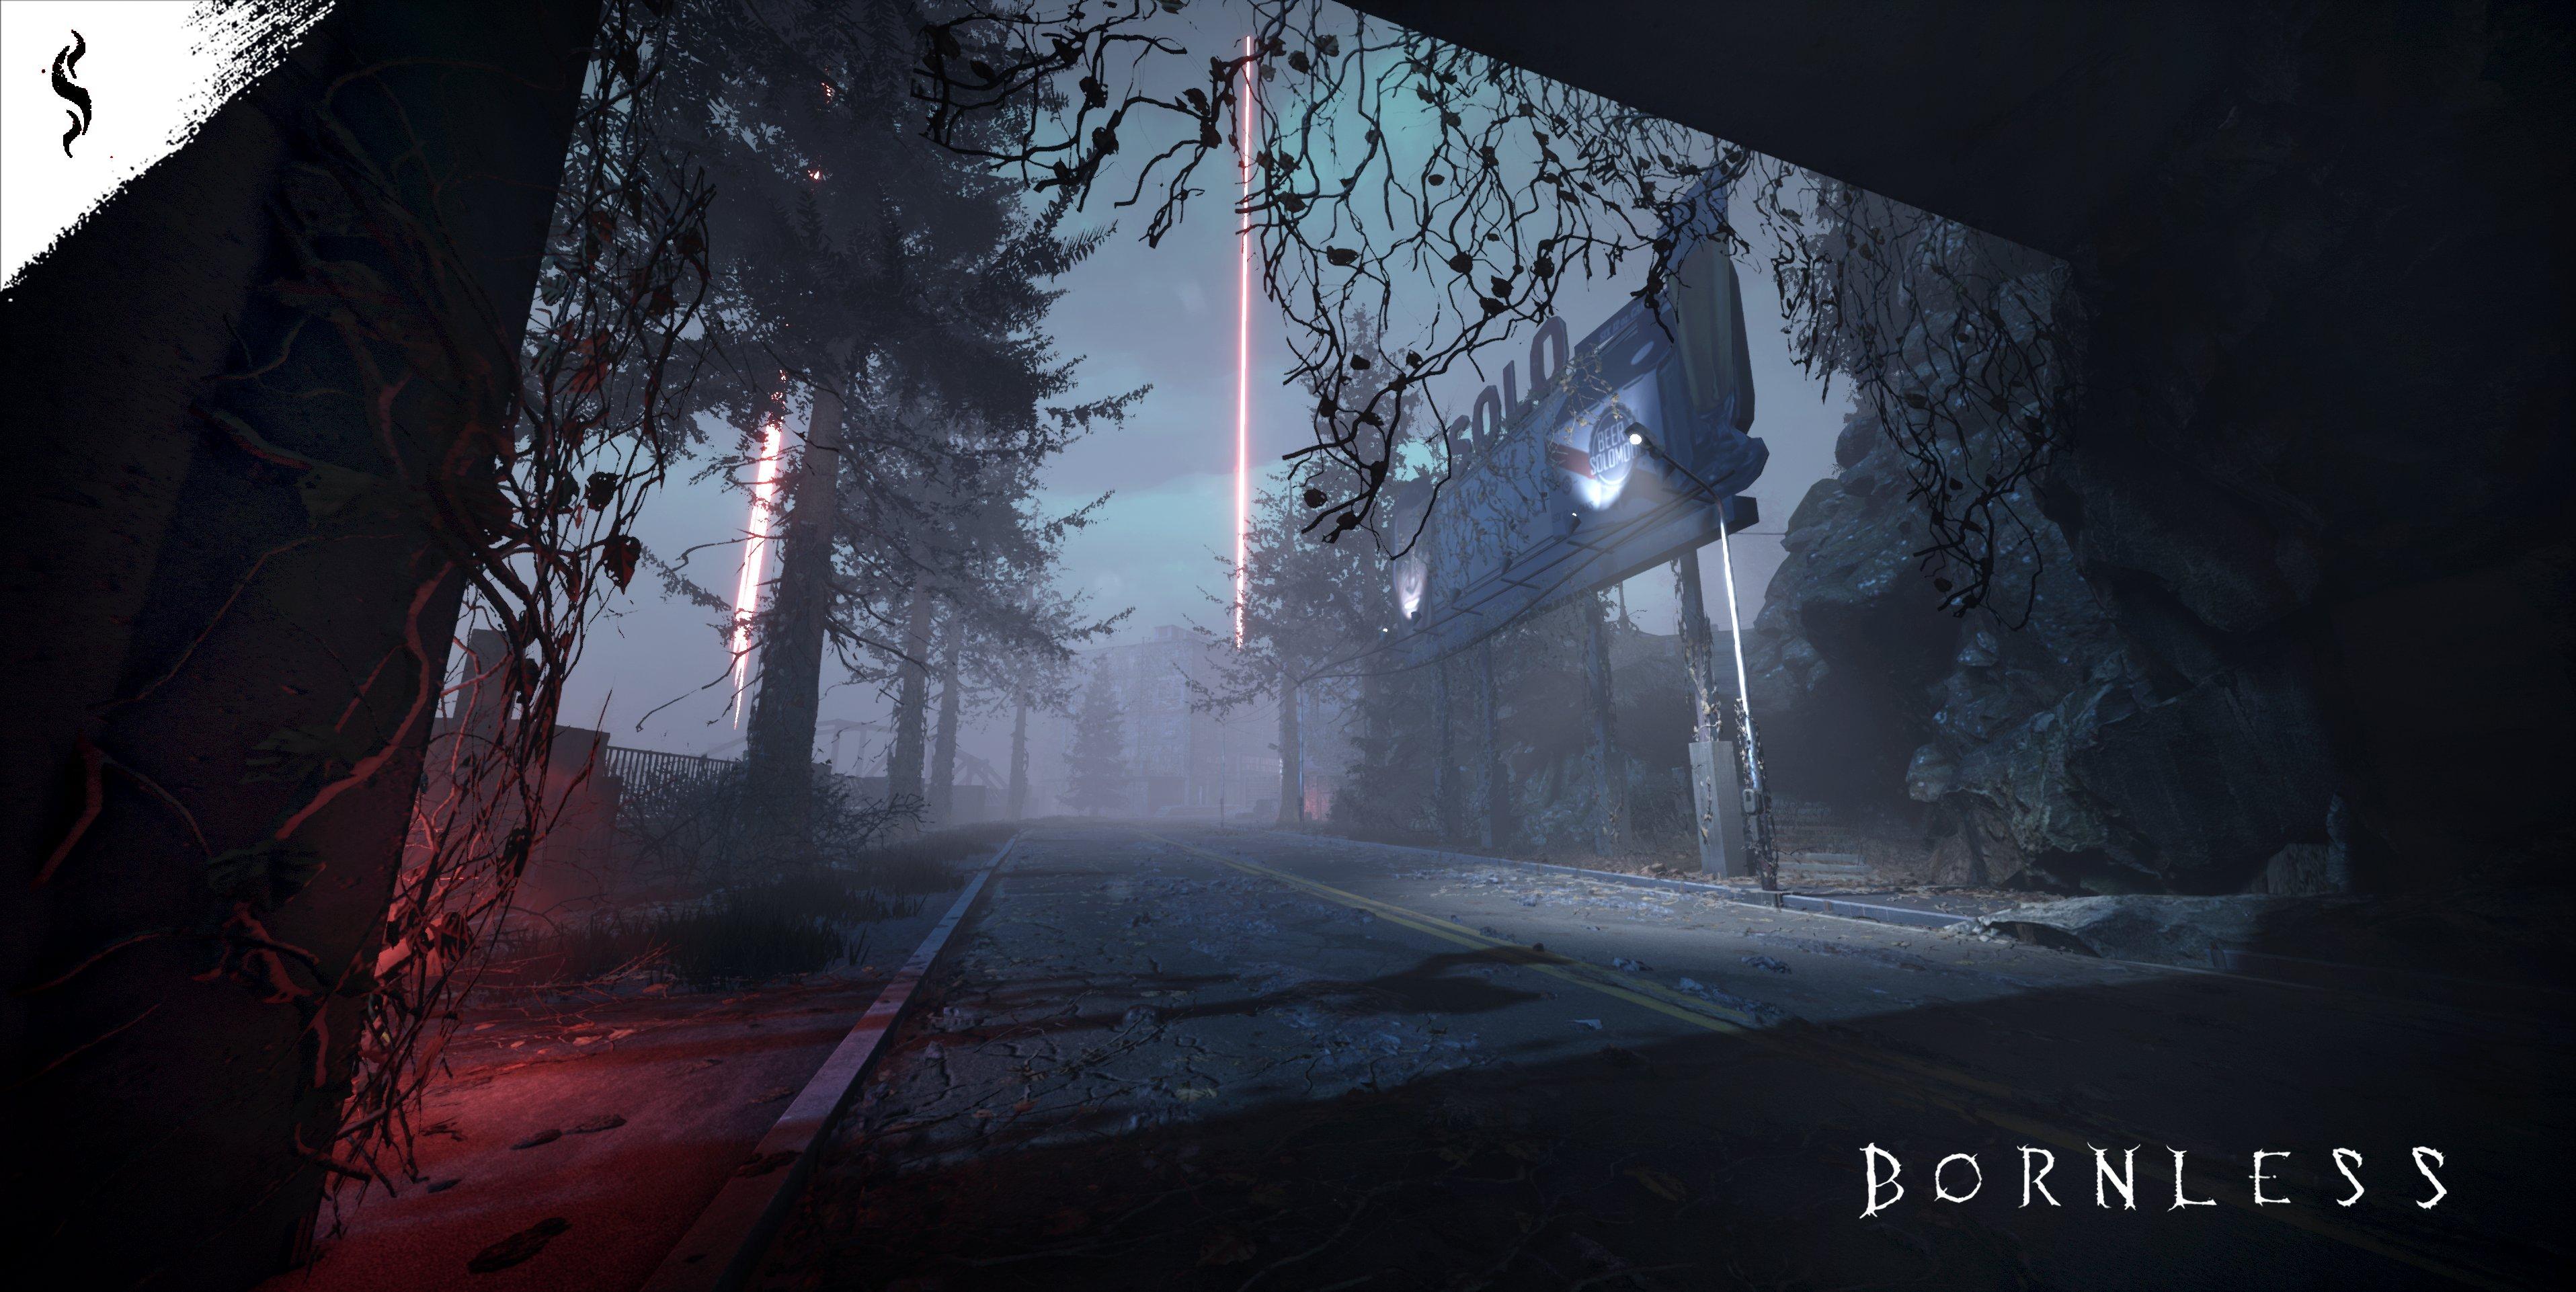 The Bornless is a free-to-play FPS game with Battle Royale elements, where players must face rivals, battle demons, and gather Incense tokens.